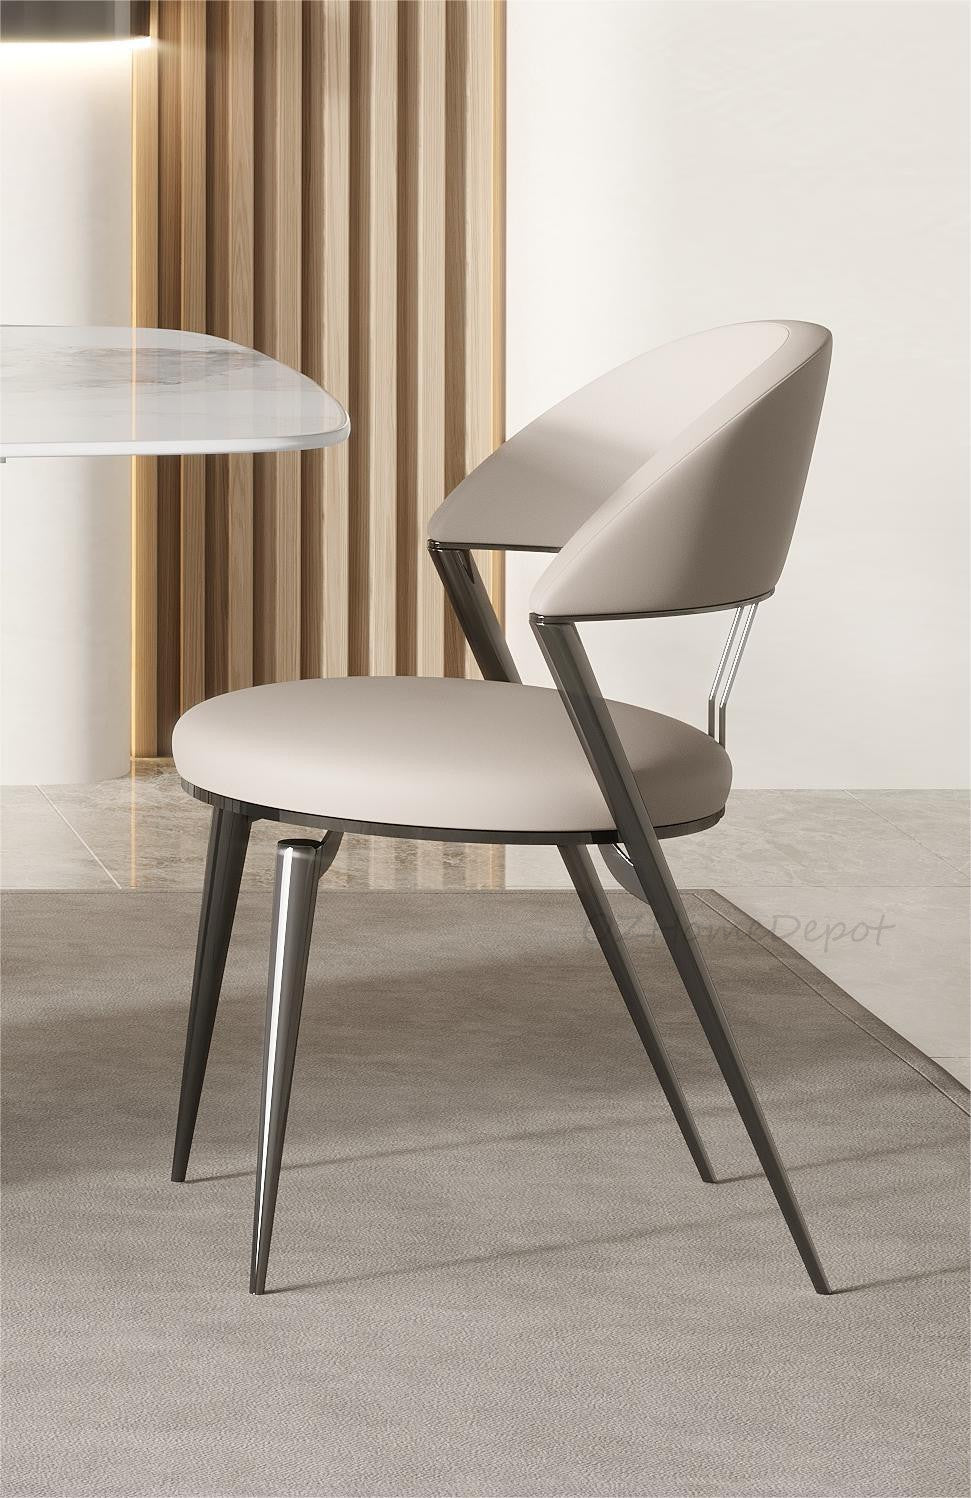 Chou PU Round Seat Style Leather Dining Chair Metal Legs Beige Color